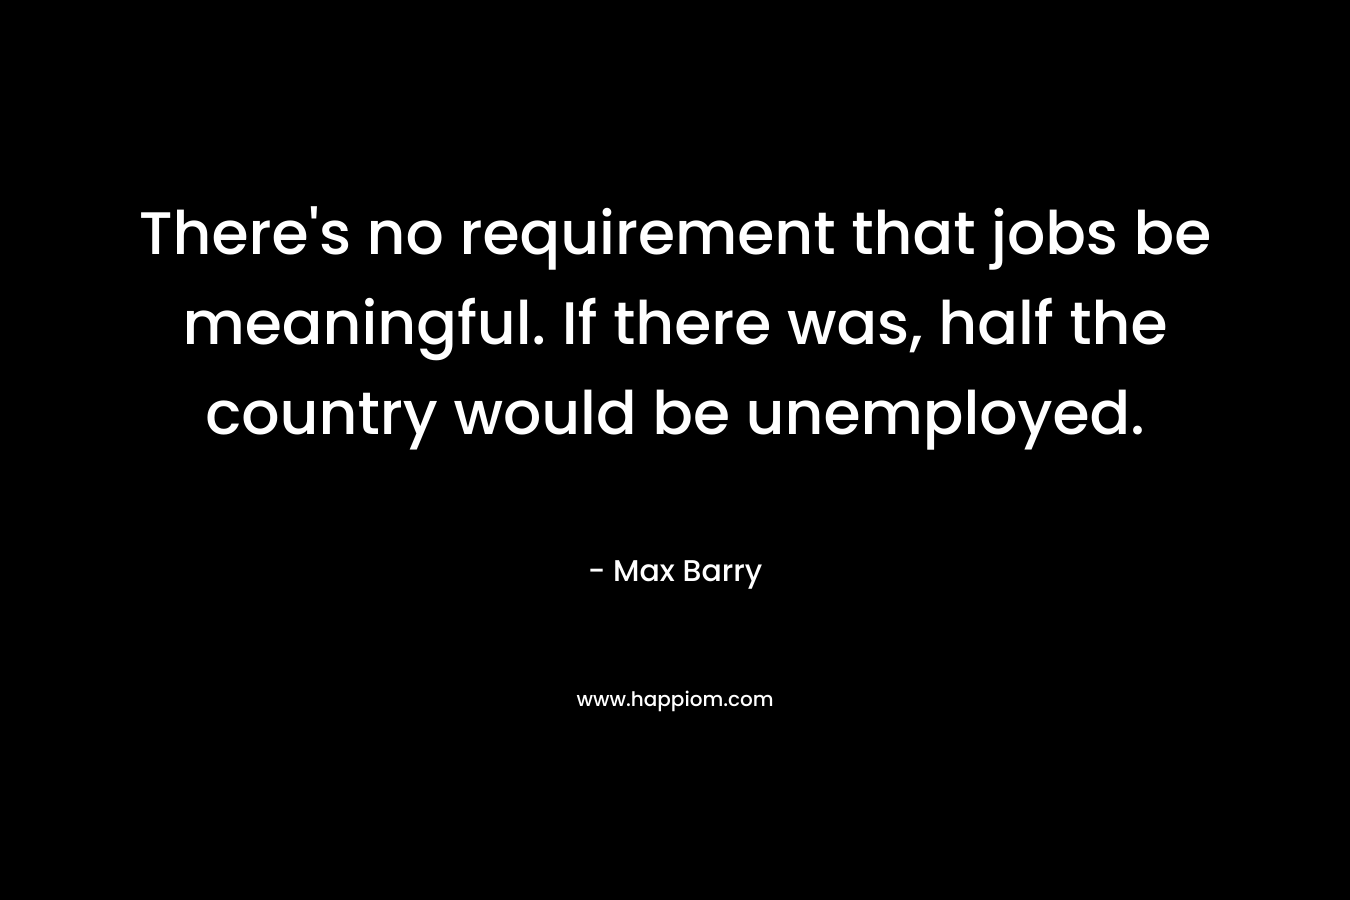 There’s no requirement that jobs be meaningful. If there was, half the country would be unemployed. – Max Barry